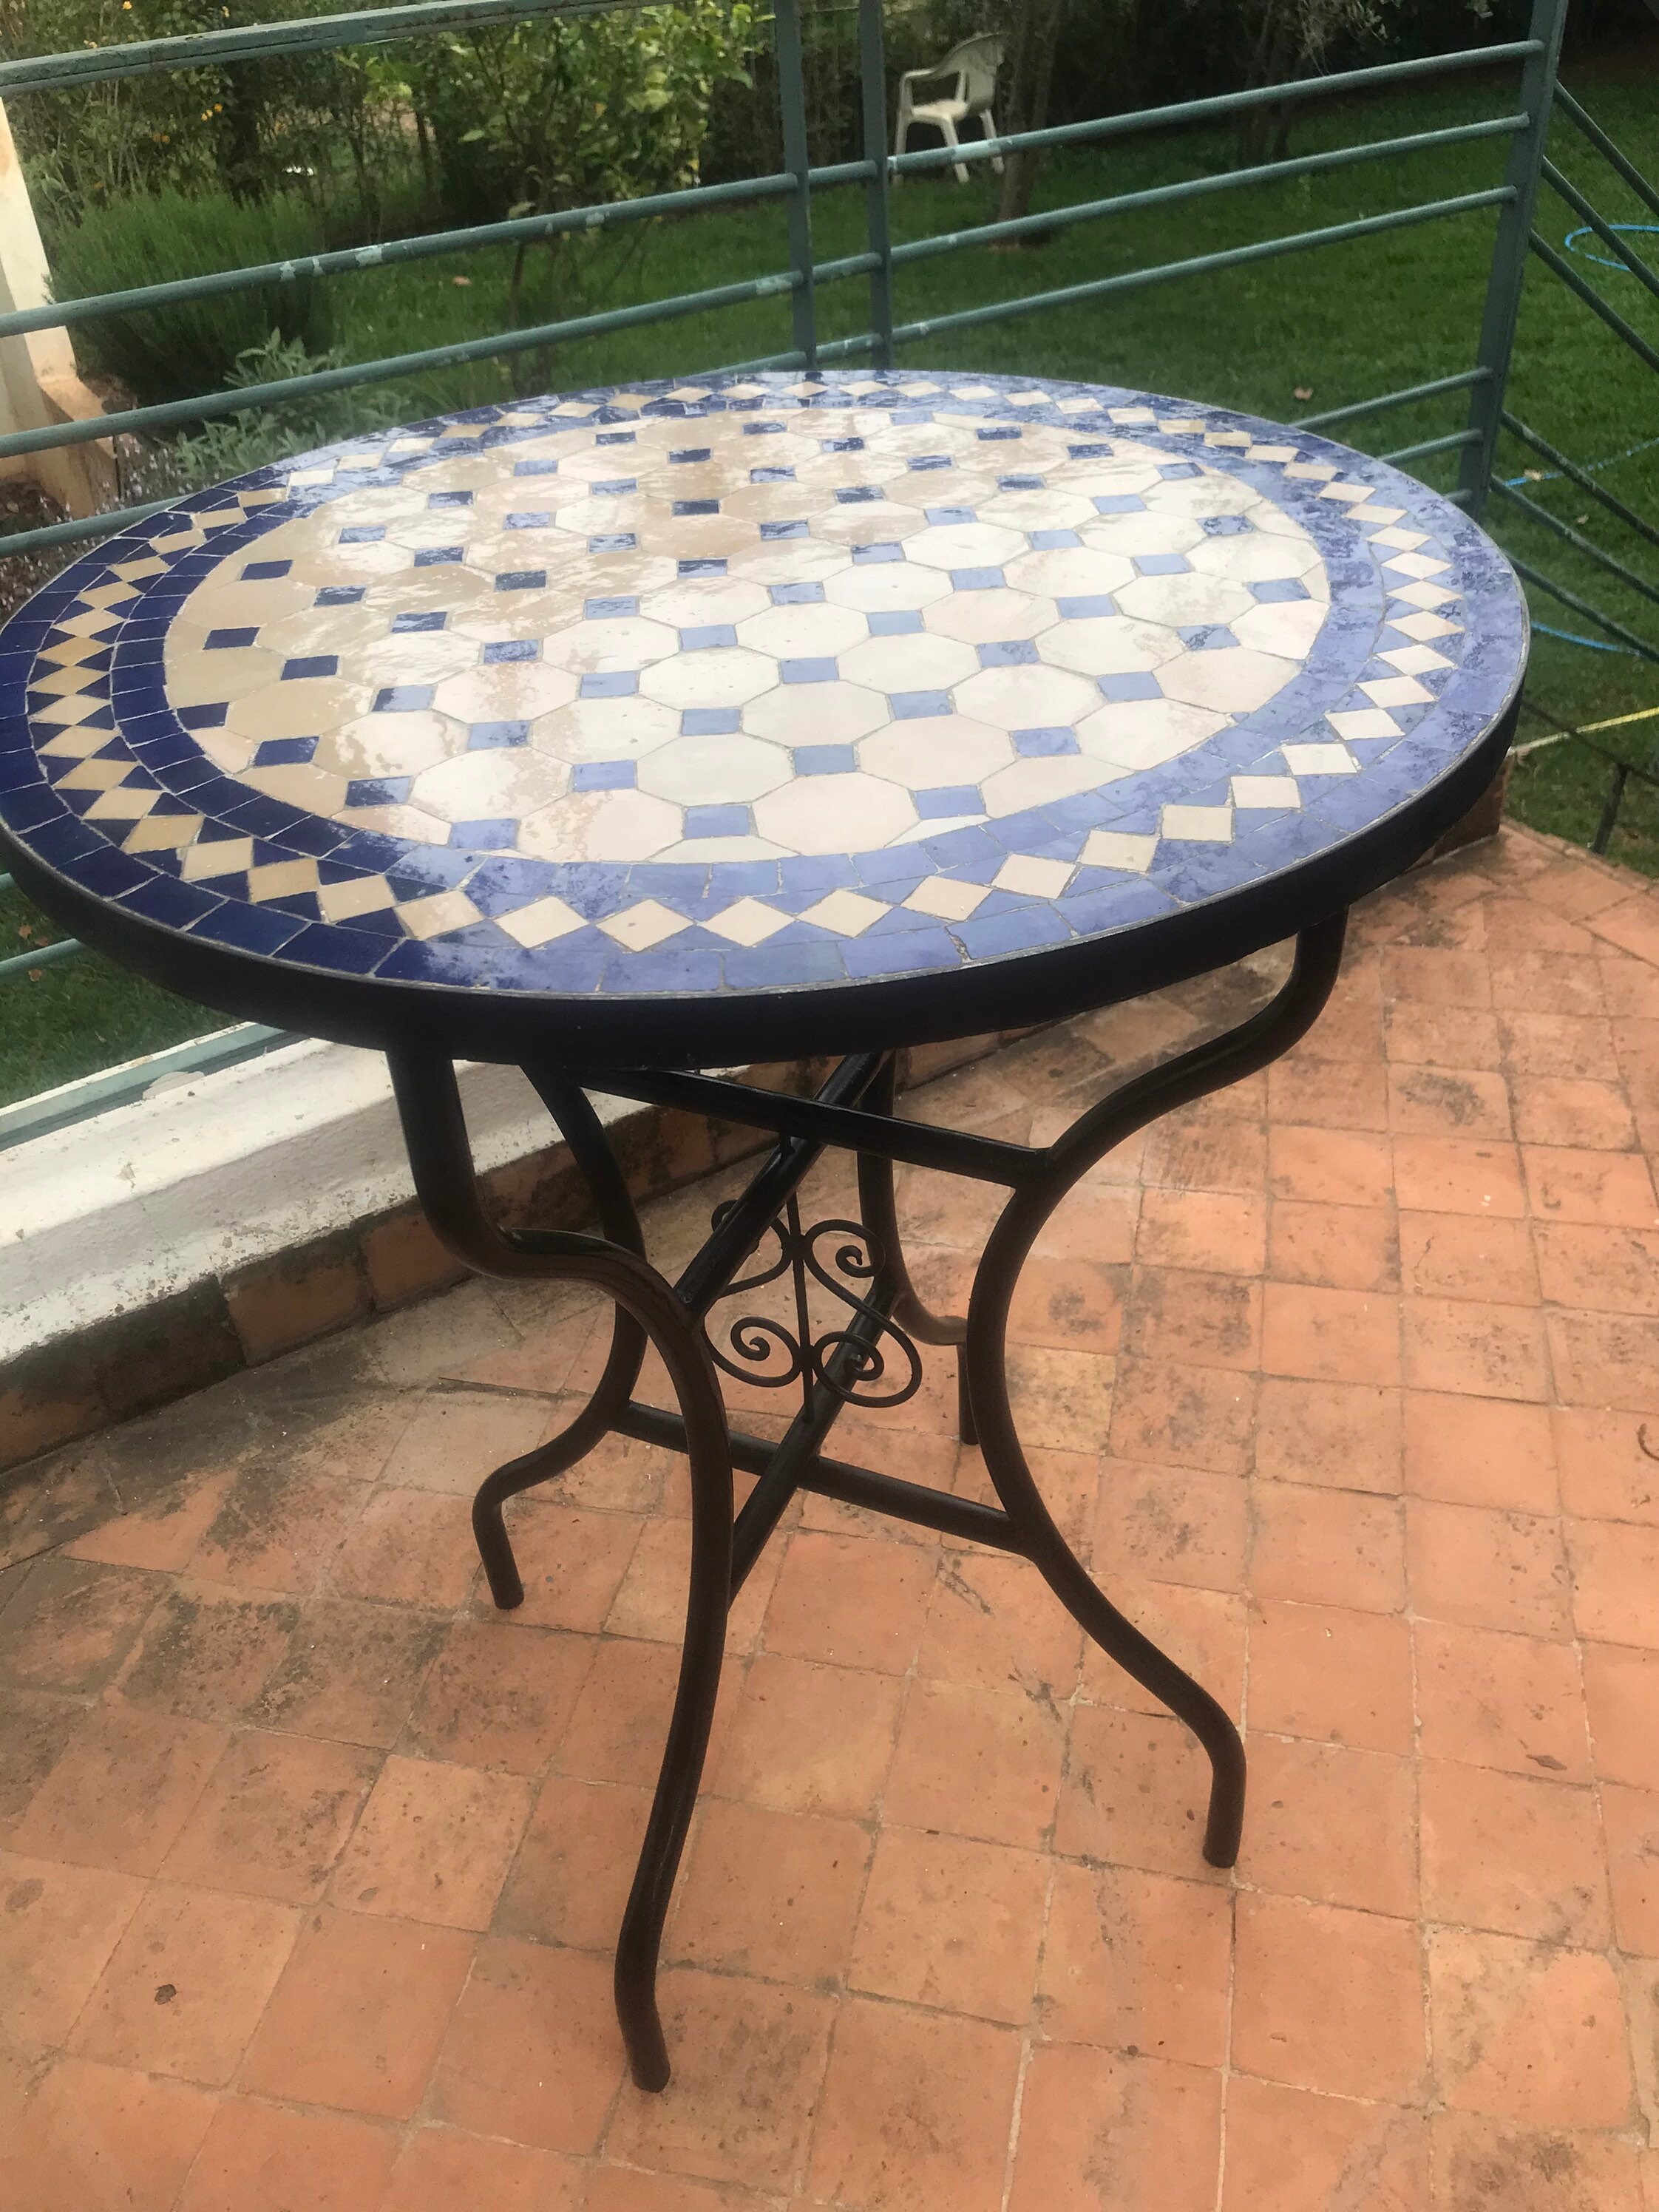 H.BETTER Mosaic Bistro Table Round Ceramic Tabletop 23.6 x 27.6 Outdoor Coffee Table Garden Balcony Table Black and White 